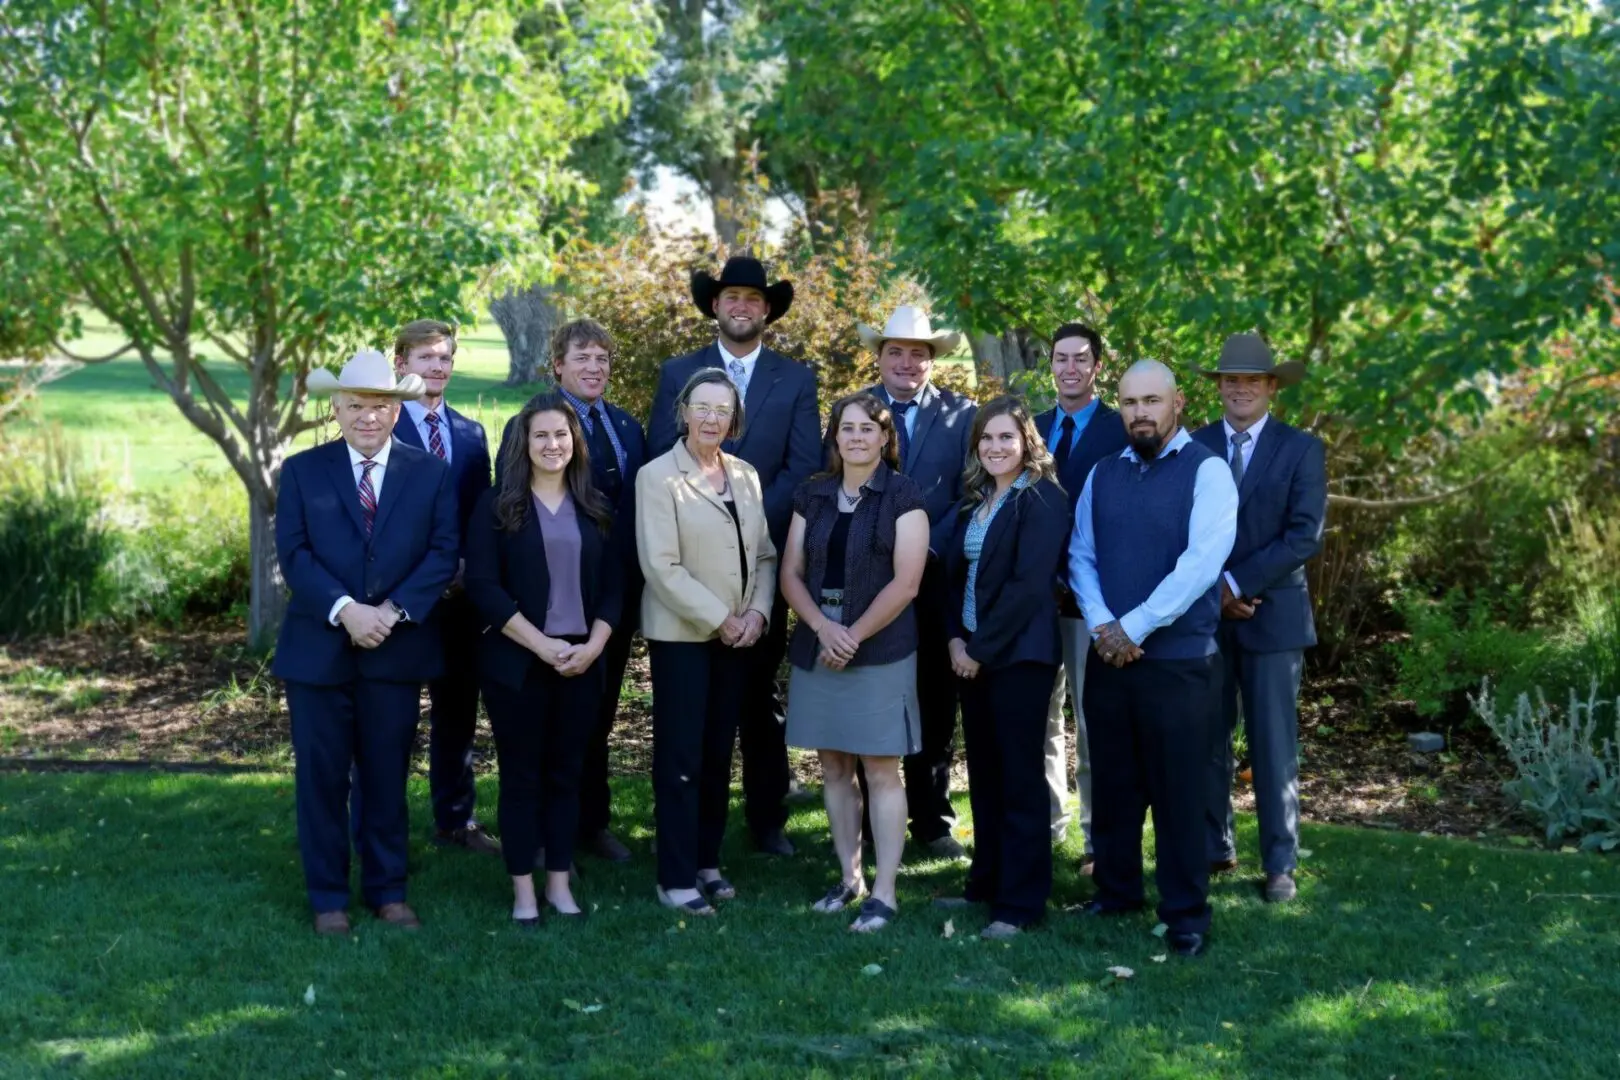 A group of people in suits and hats standing on top of grass.